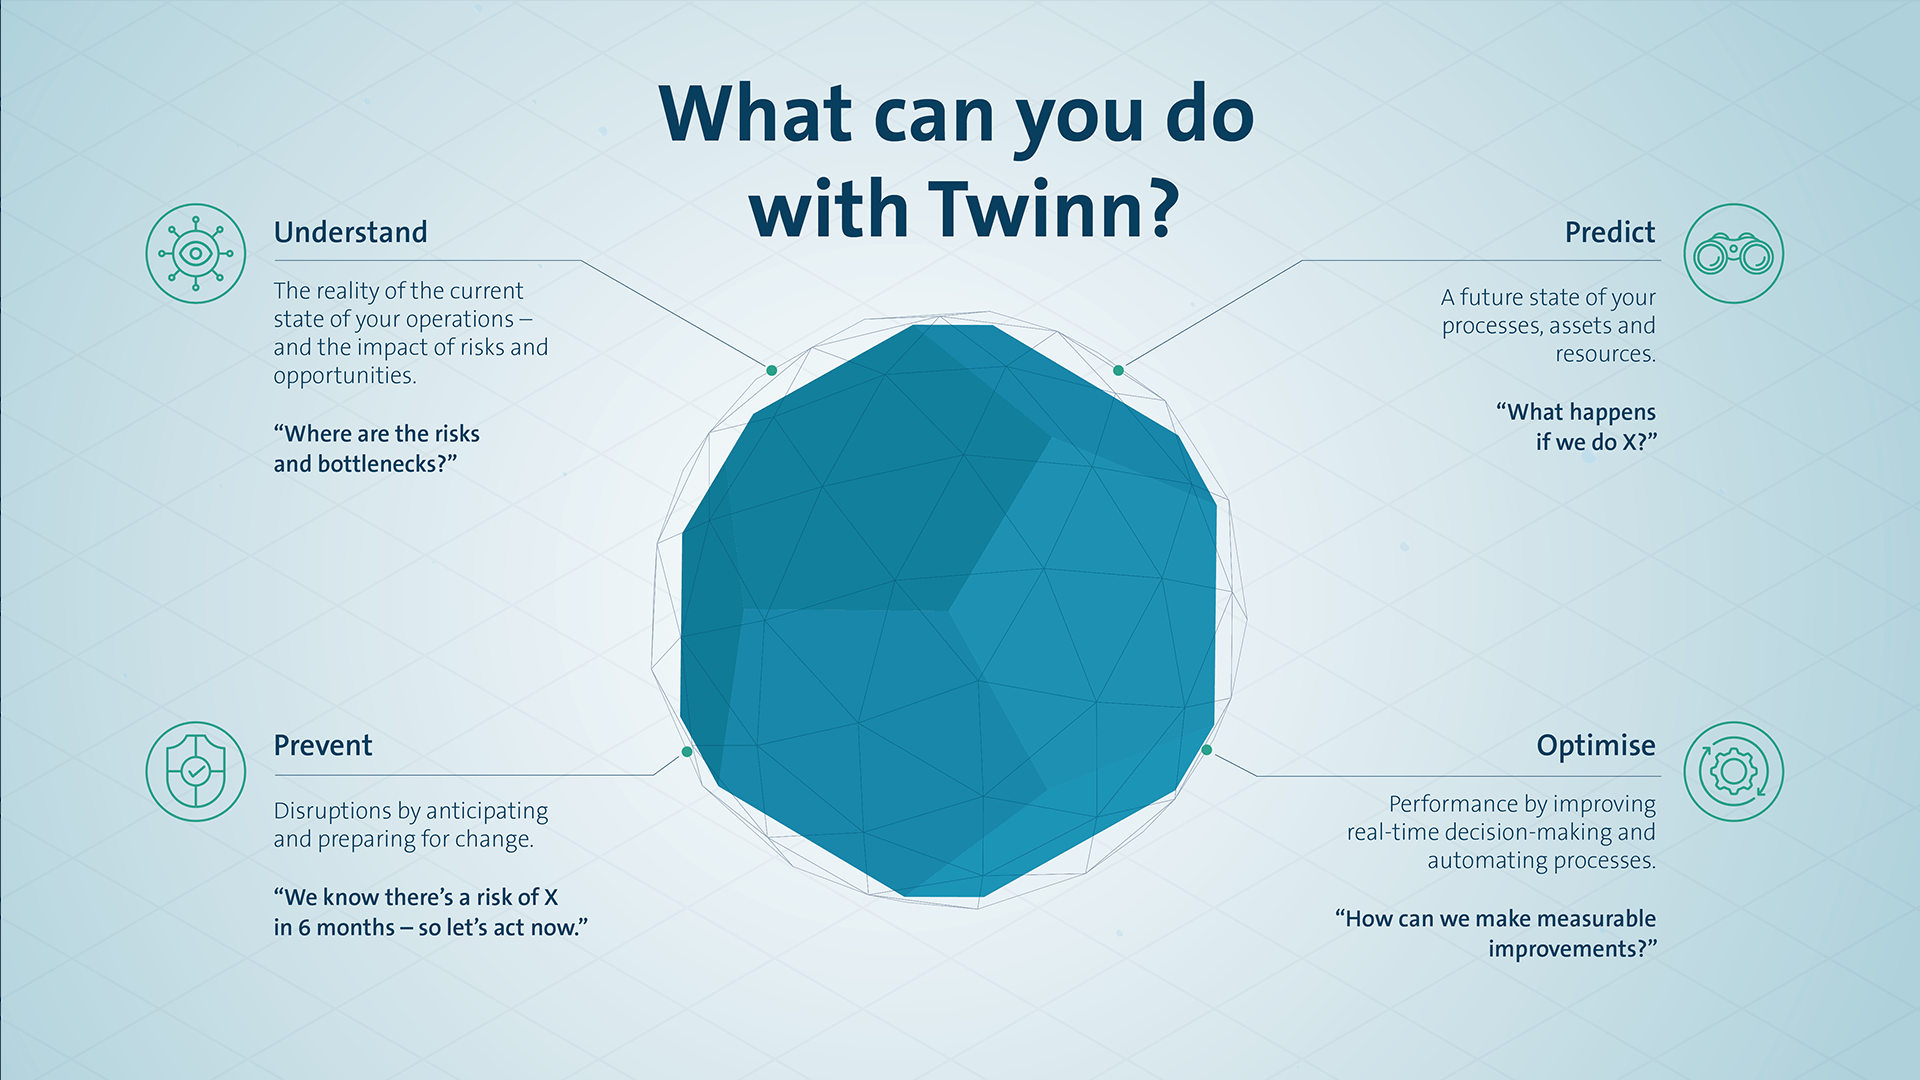 What can you do with Twinn infographic